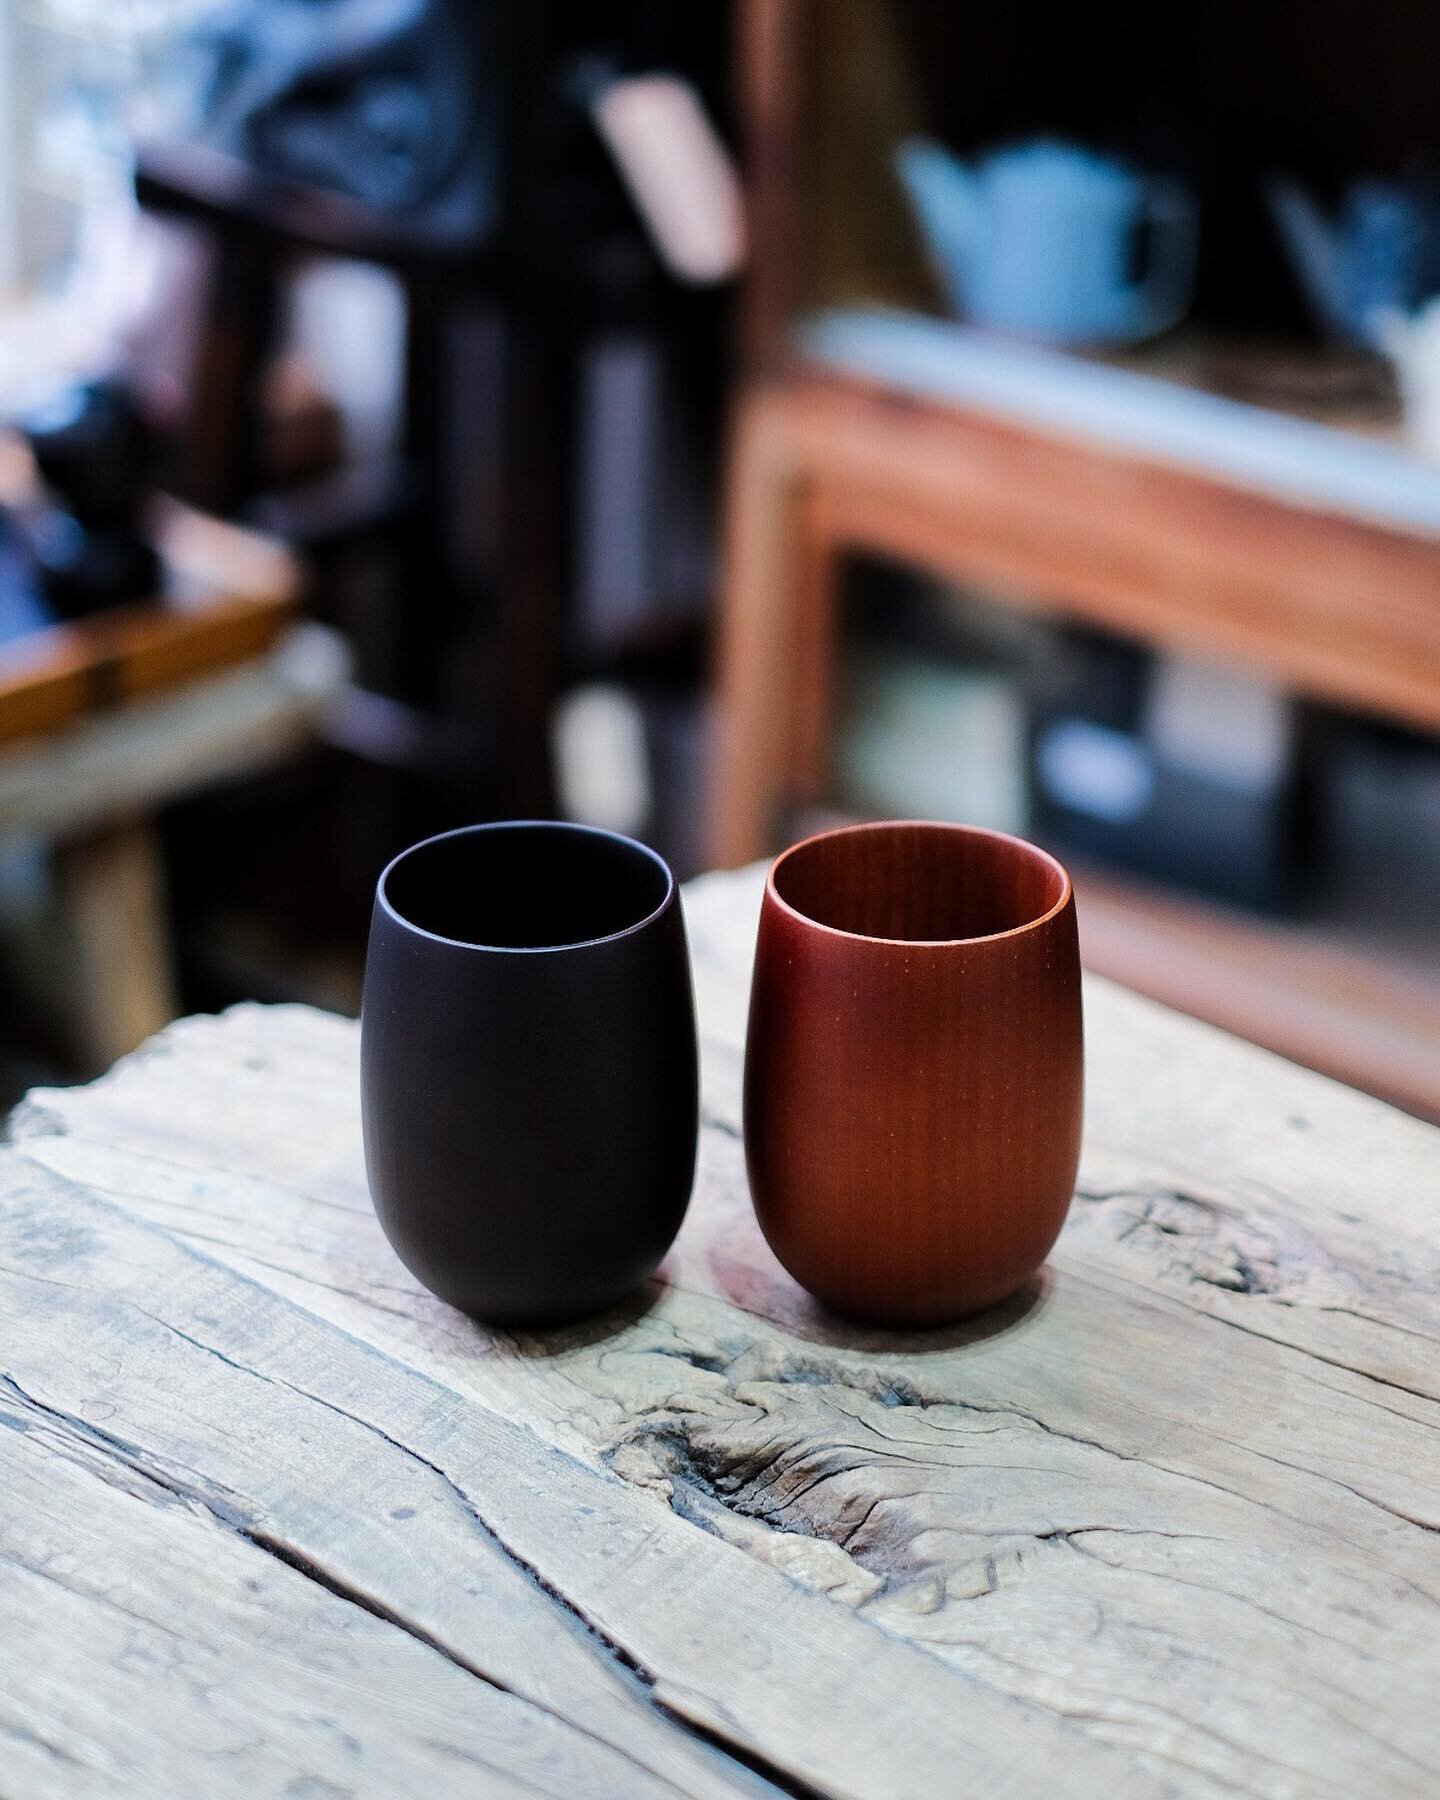 Our wood teacups, their perfect curves and pure, without any designs or embellishments, make this two-piece design. Without handle, they follow the japanese code. Because the cups japanese do not have a handle.
.

#craft #design #tealovers #authentiq